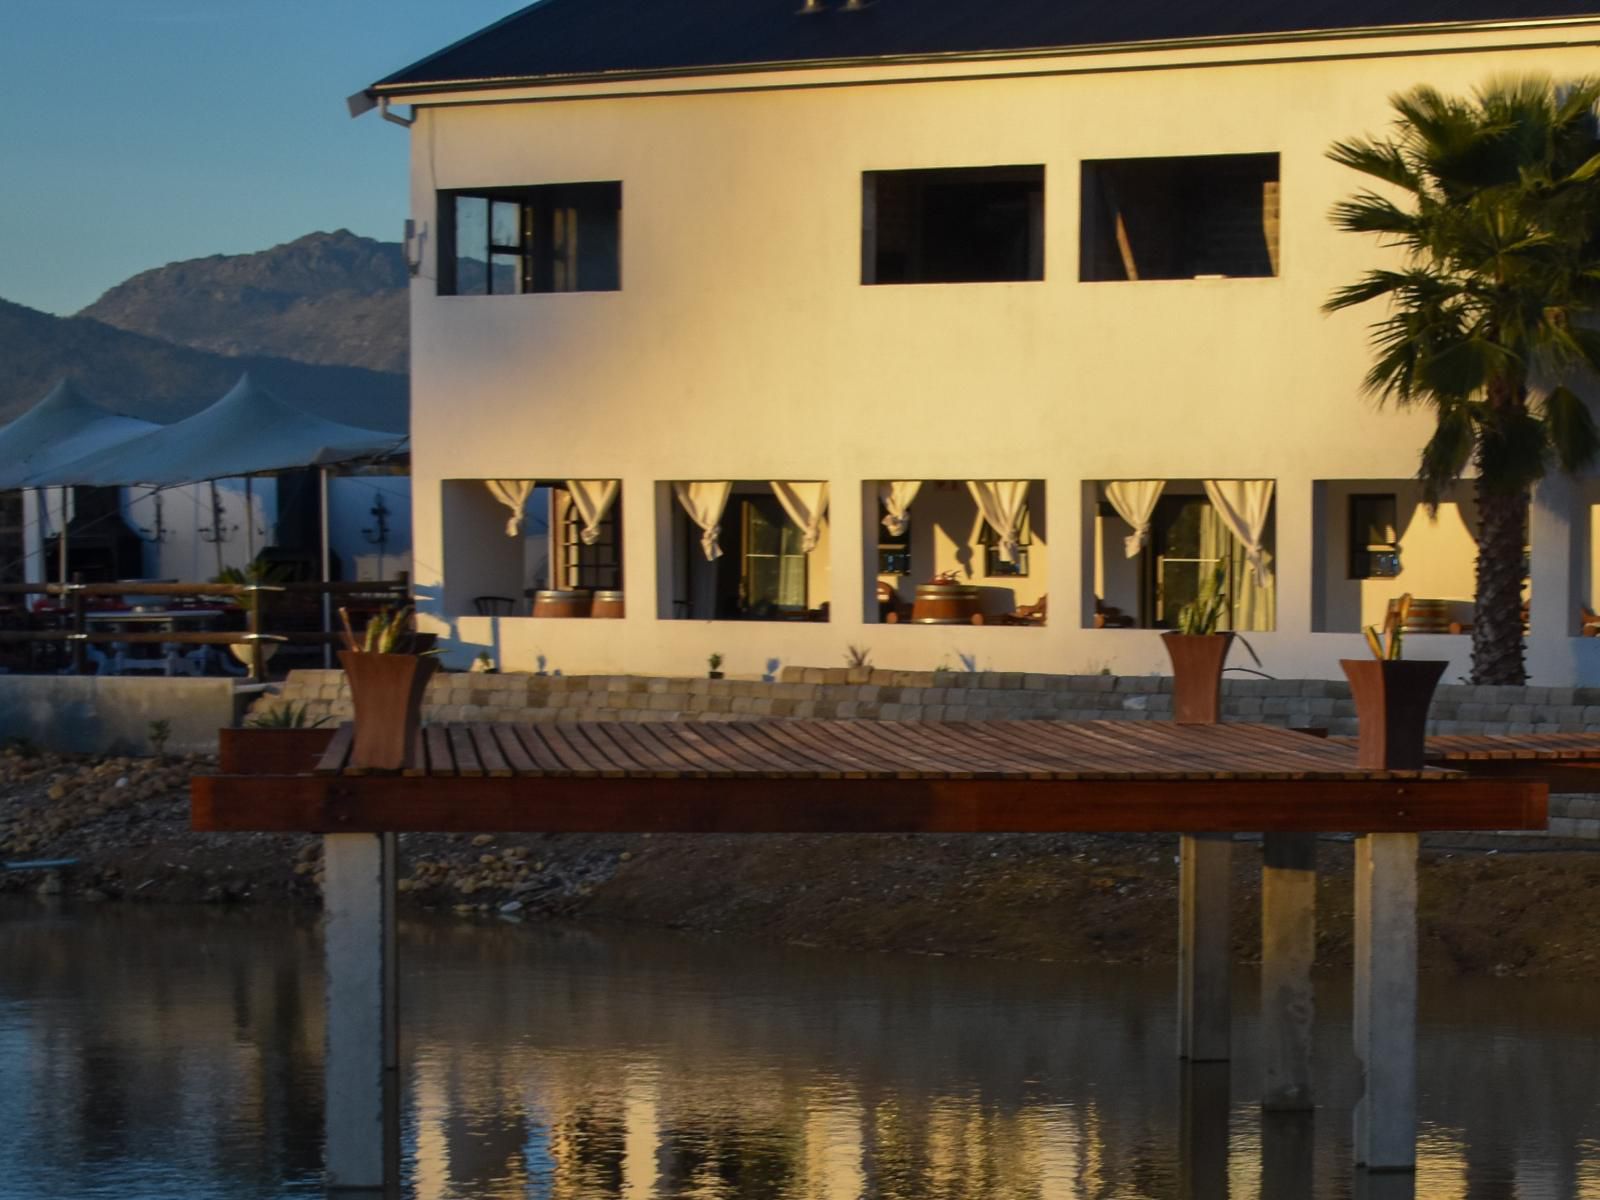 Middelplaas Paarl Guesthouse Paarl Western Cape South Africa House, Building, Architecture, Lake, Nature, Waters